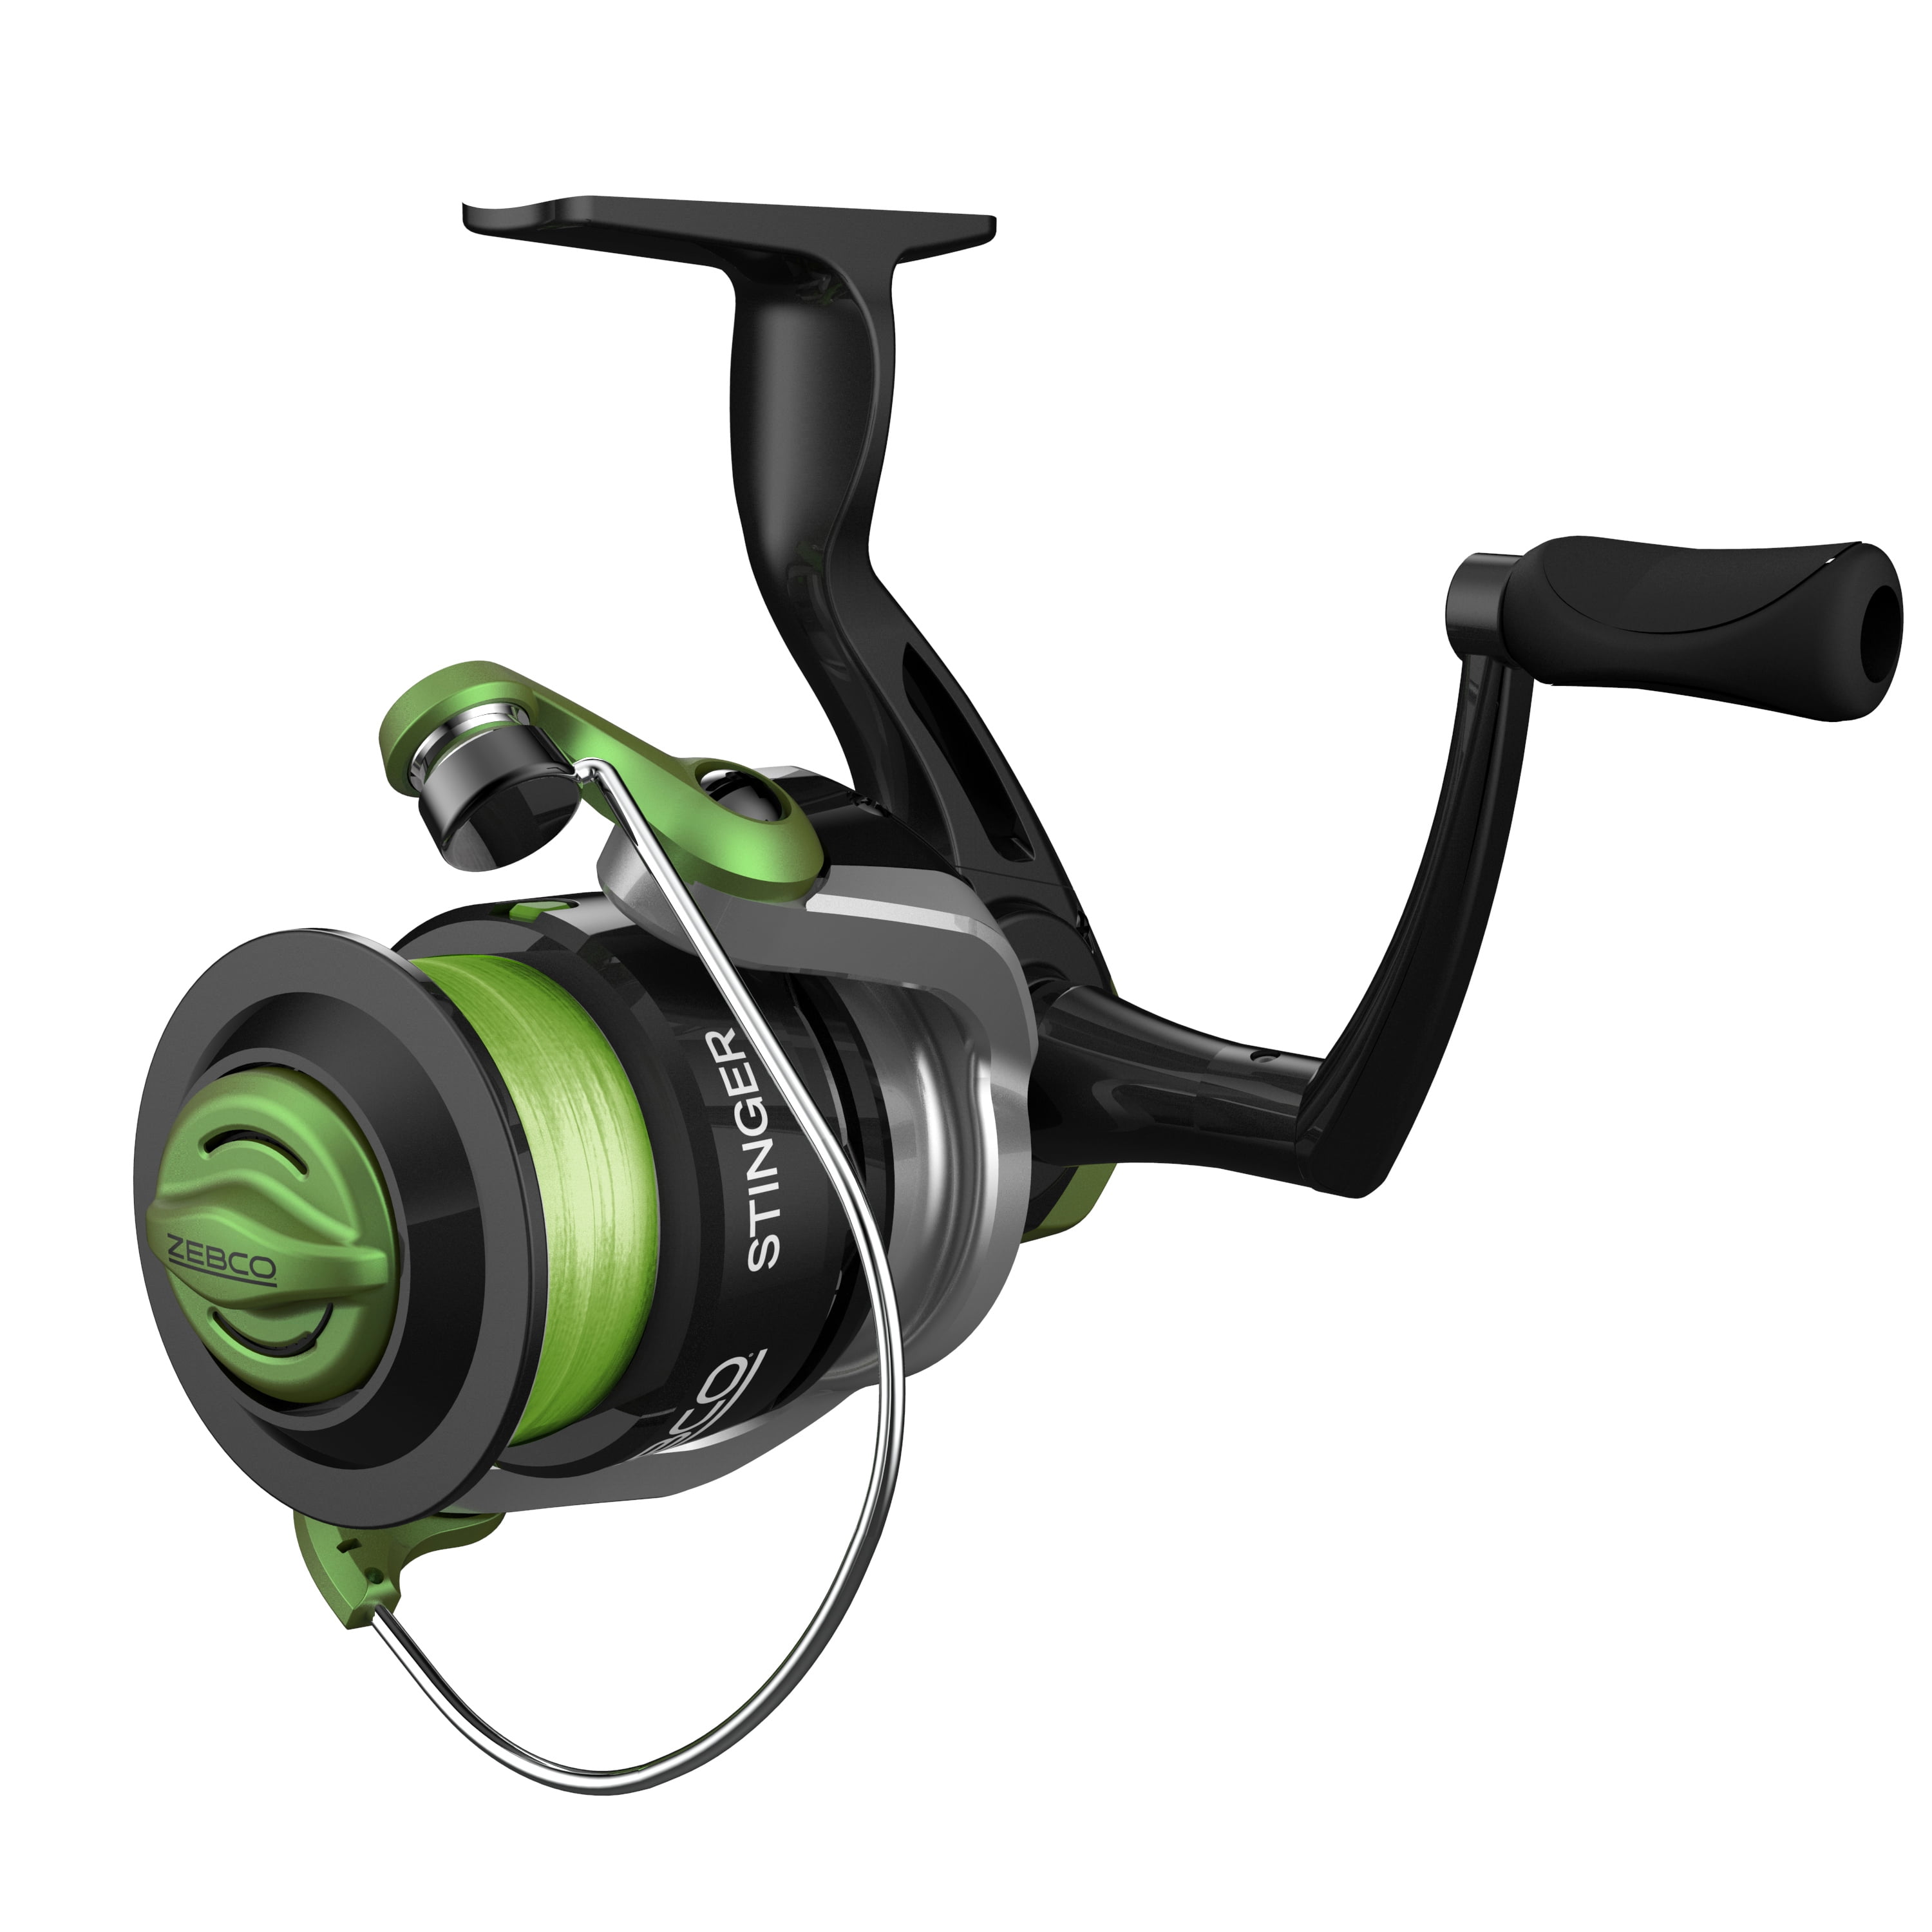 Zebco Stinger Spinning Fishing Reel, Size 10 Changeable Right- or Left-Hand  Retrieve, All-Metal Gears, Ball Bearing System, Pre-Spooled with 6-Pound